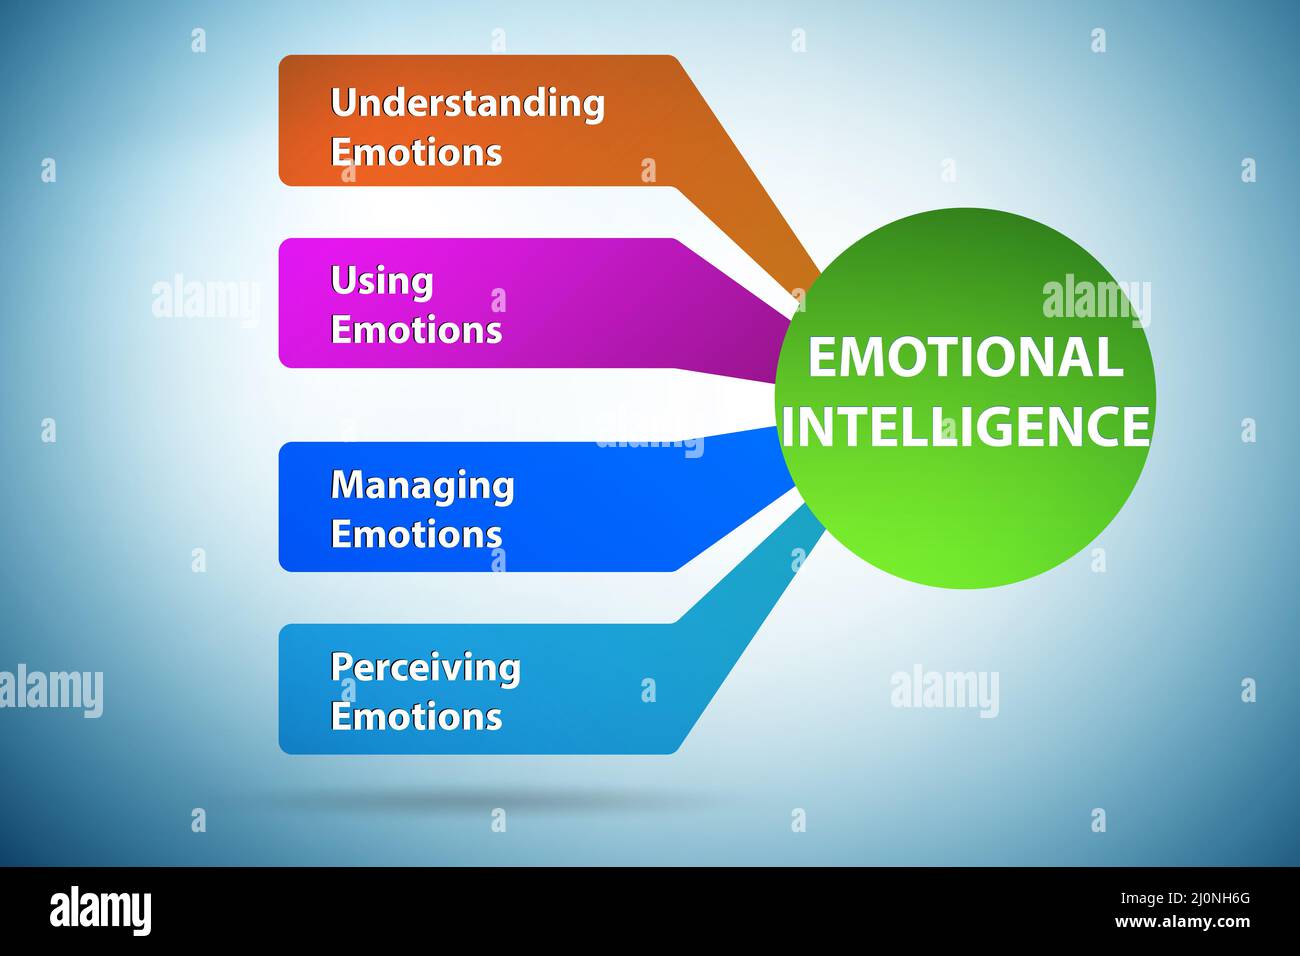 Emotional Intelligence business concept in management Stock Photo - Alamy